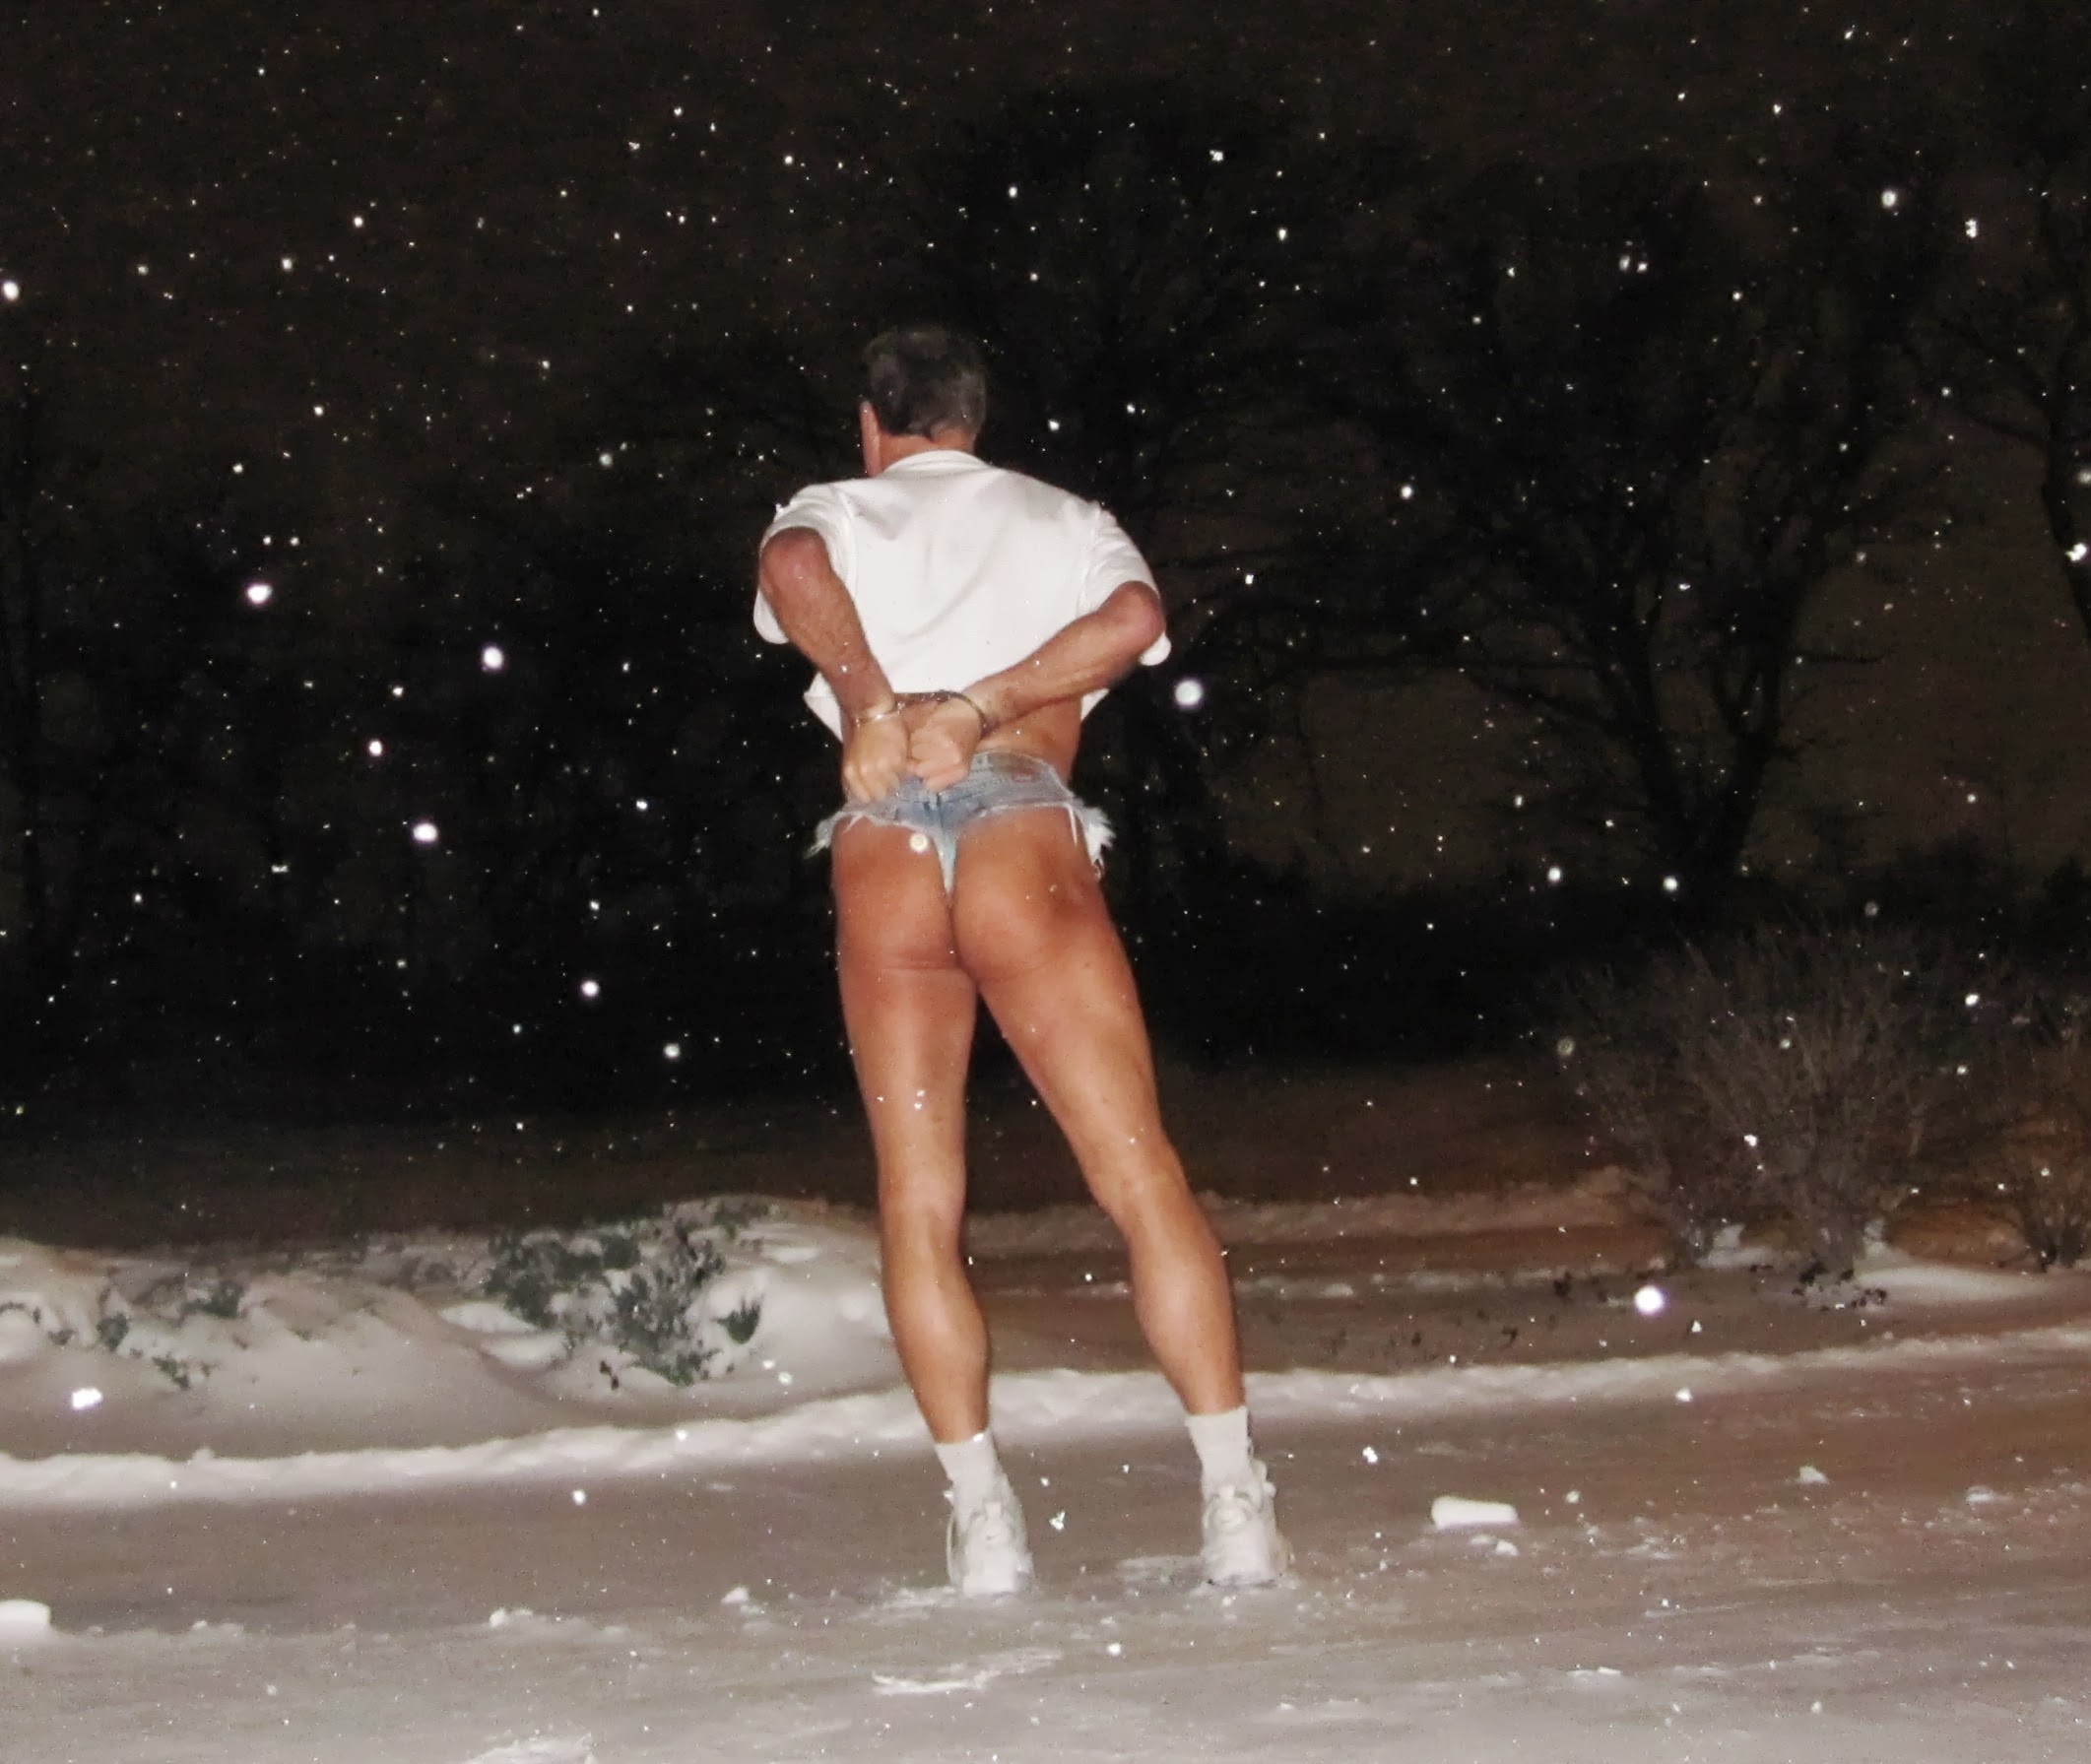 Exhibitionist Handcuffed in a Snowstorm